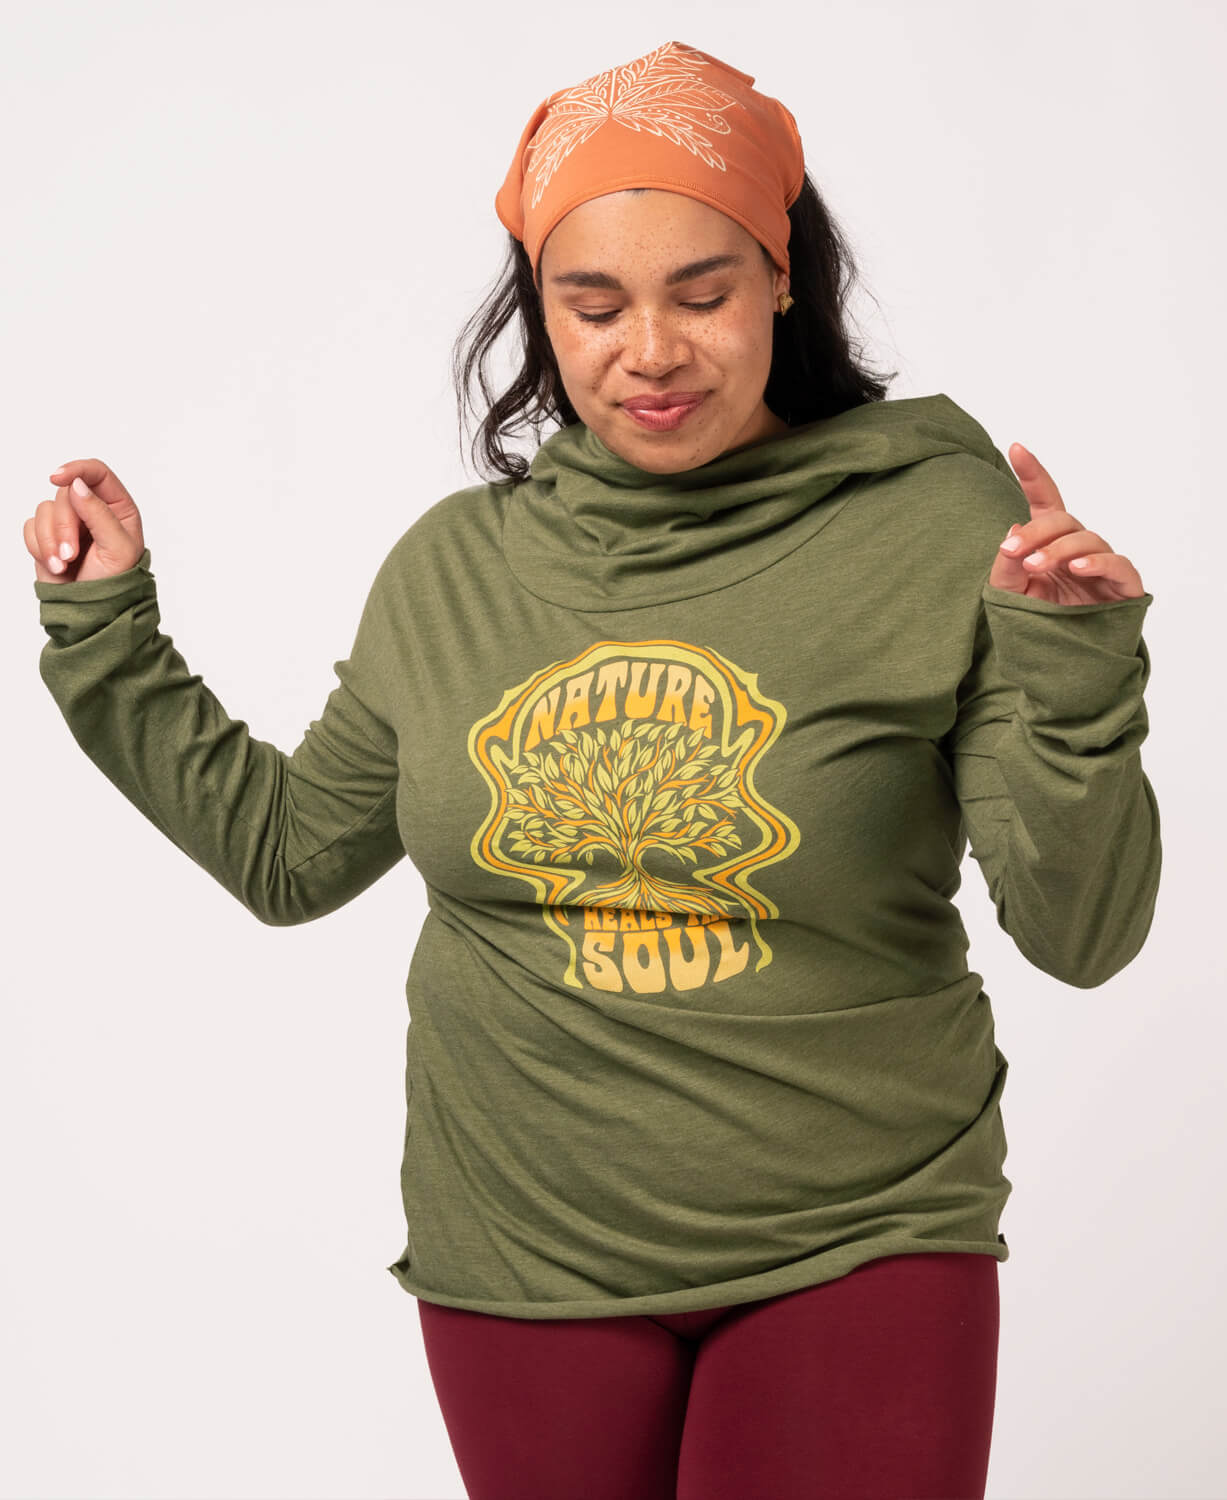 Closeout! Nature Heals the Soul Cowl Yoga Hoody